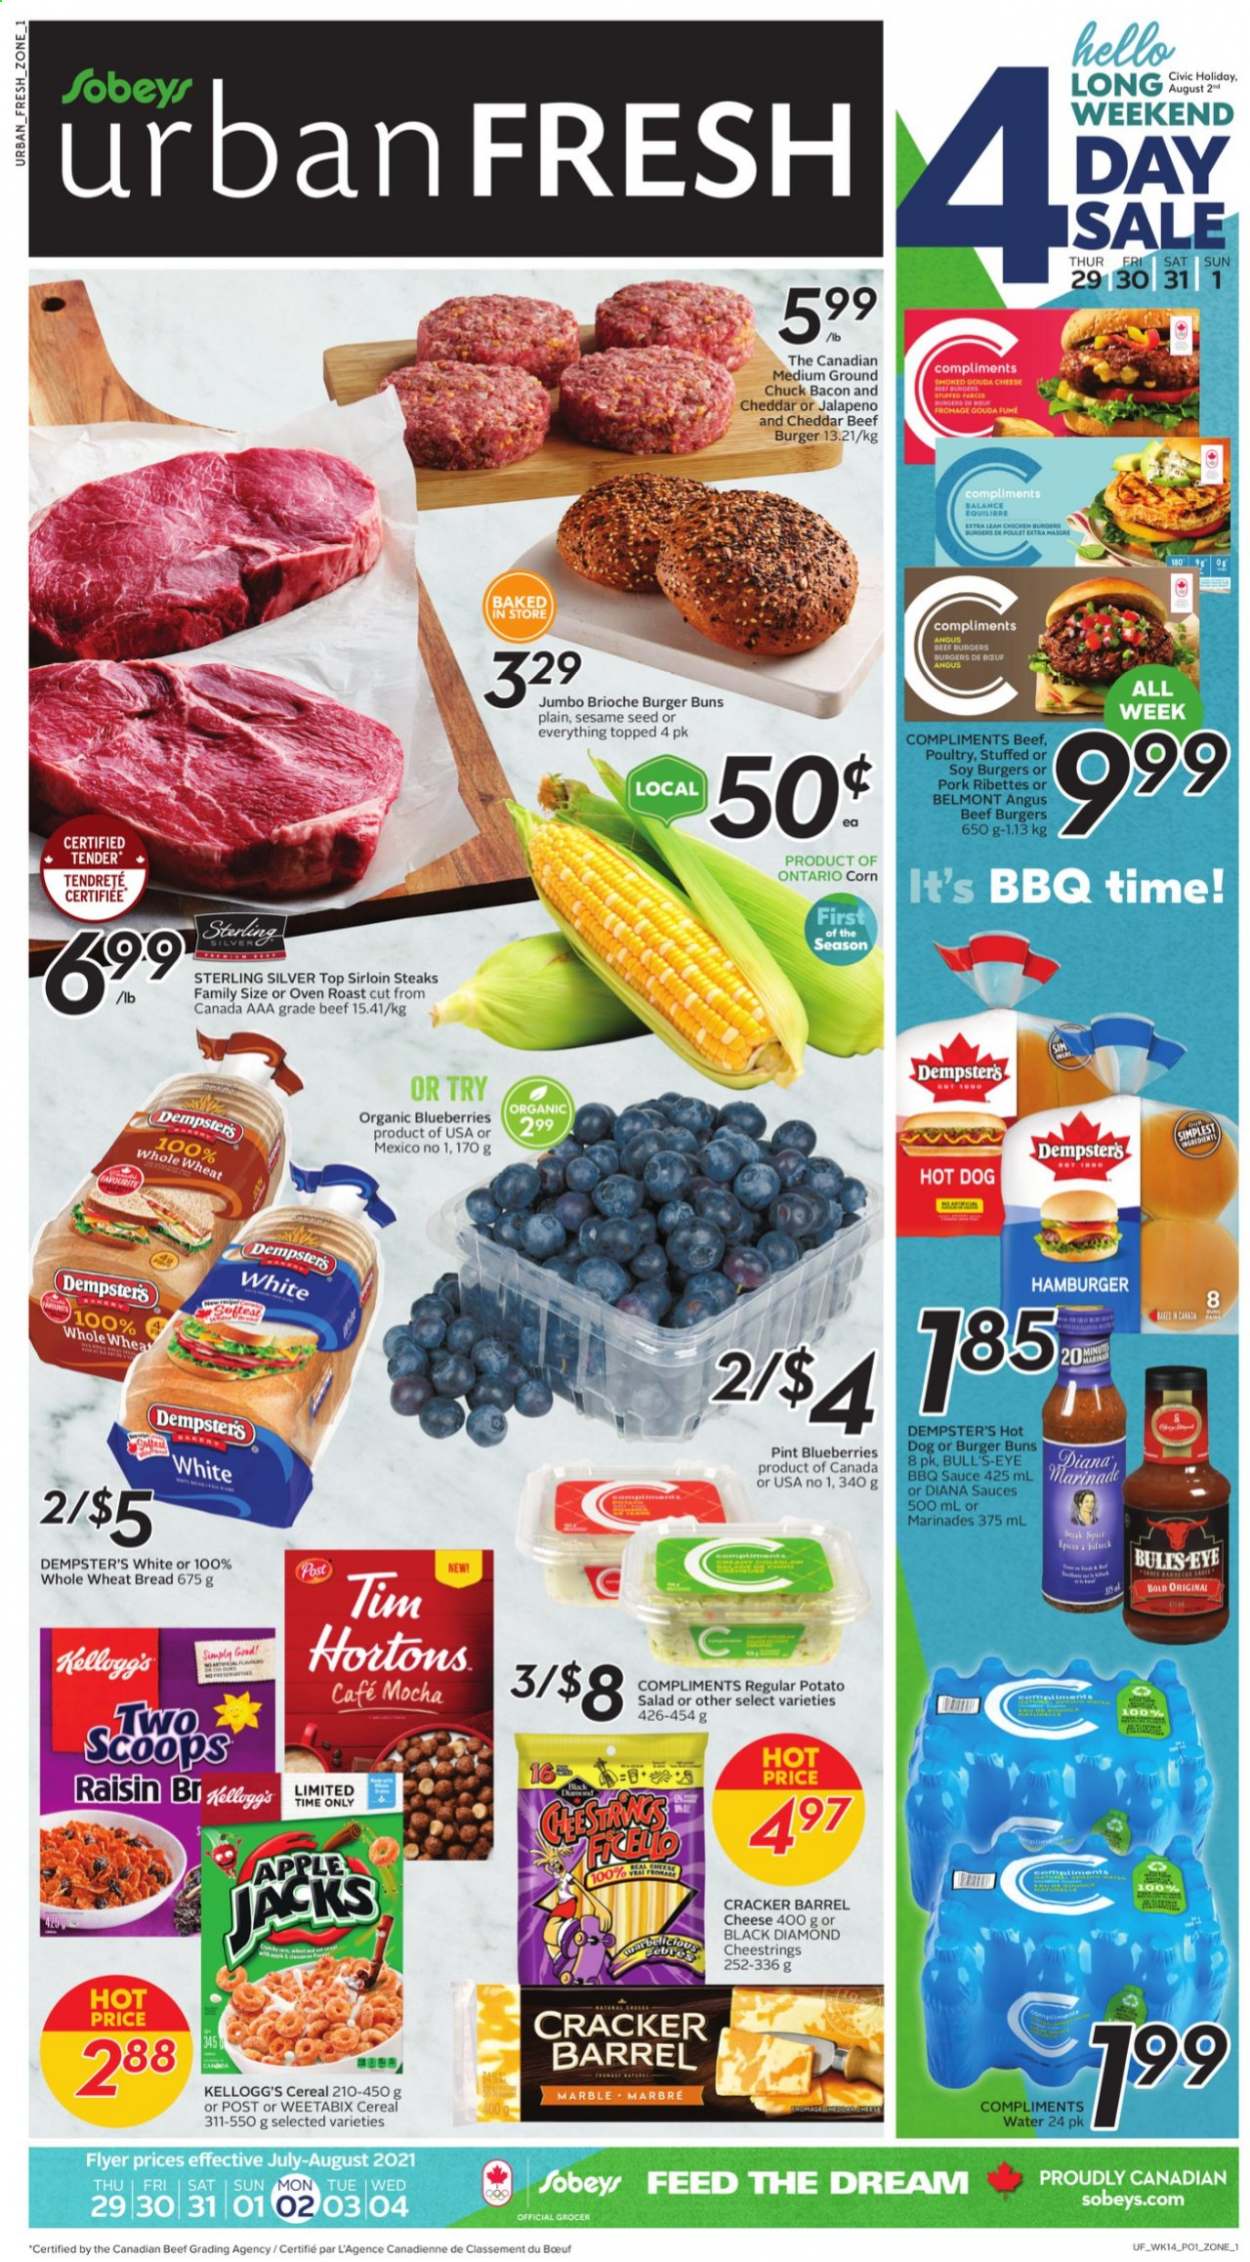 thumbnail - Sobeys Urban Fresh Flyer - July 29, 2021 - August 04, 2021 - Sales products - wheat bread, buns, burger buns, brioche, corn, blueberries, hot dog, beef burger, bacon, potato salad, gouda, string cheese, cheddar, cheese, crackers, Kellogg's, sesame seed, cereals, Weetabix, spice, BBQ sauce, marinade, beef meat, ground chuck, sirloin steak, steak. Page 1.